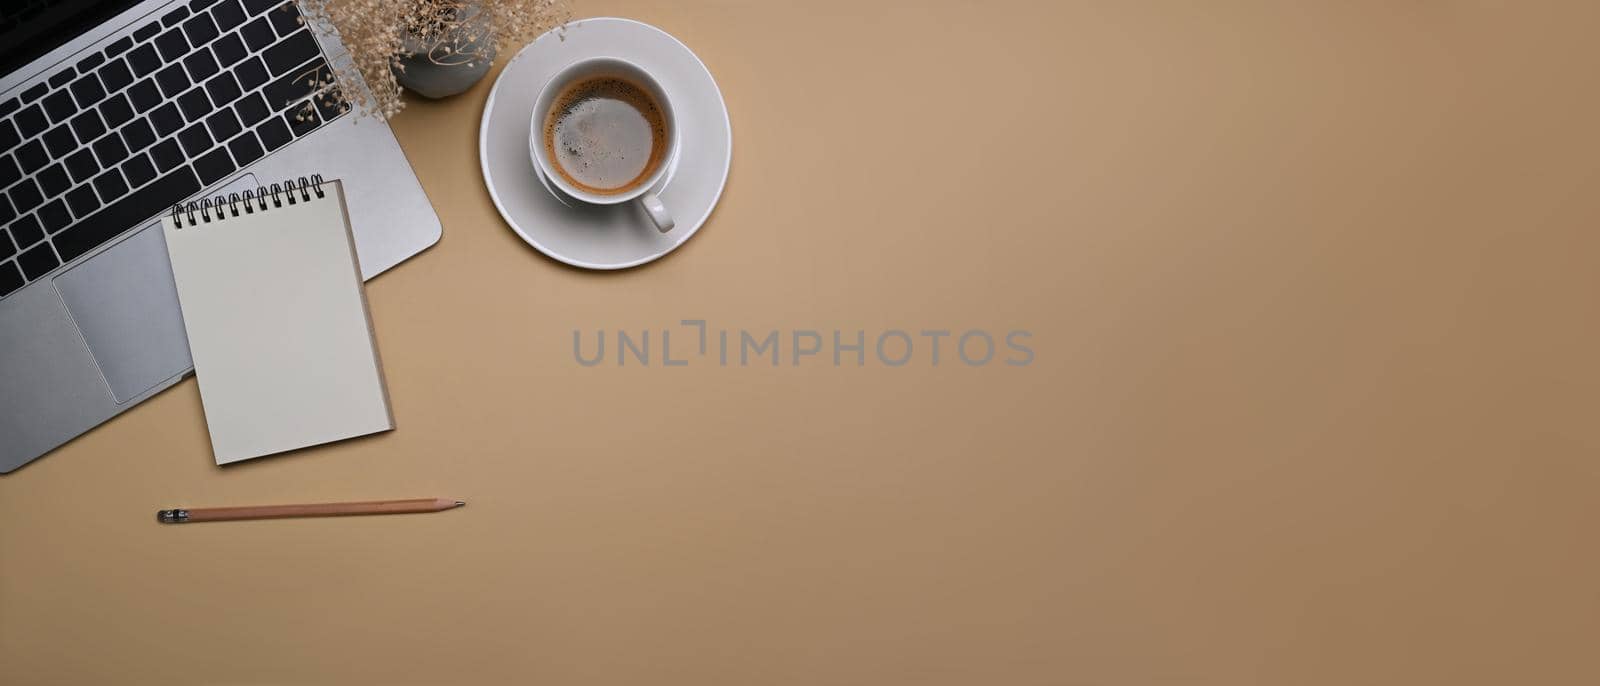 Laptop computer, coffee cup and notebook on beige background. Top view. by prathanchorruangsak